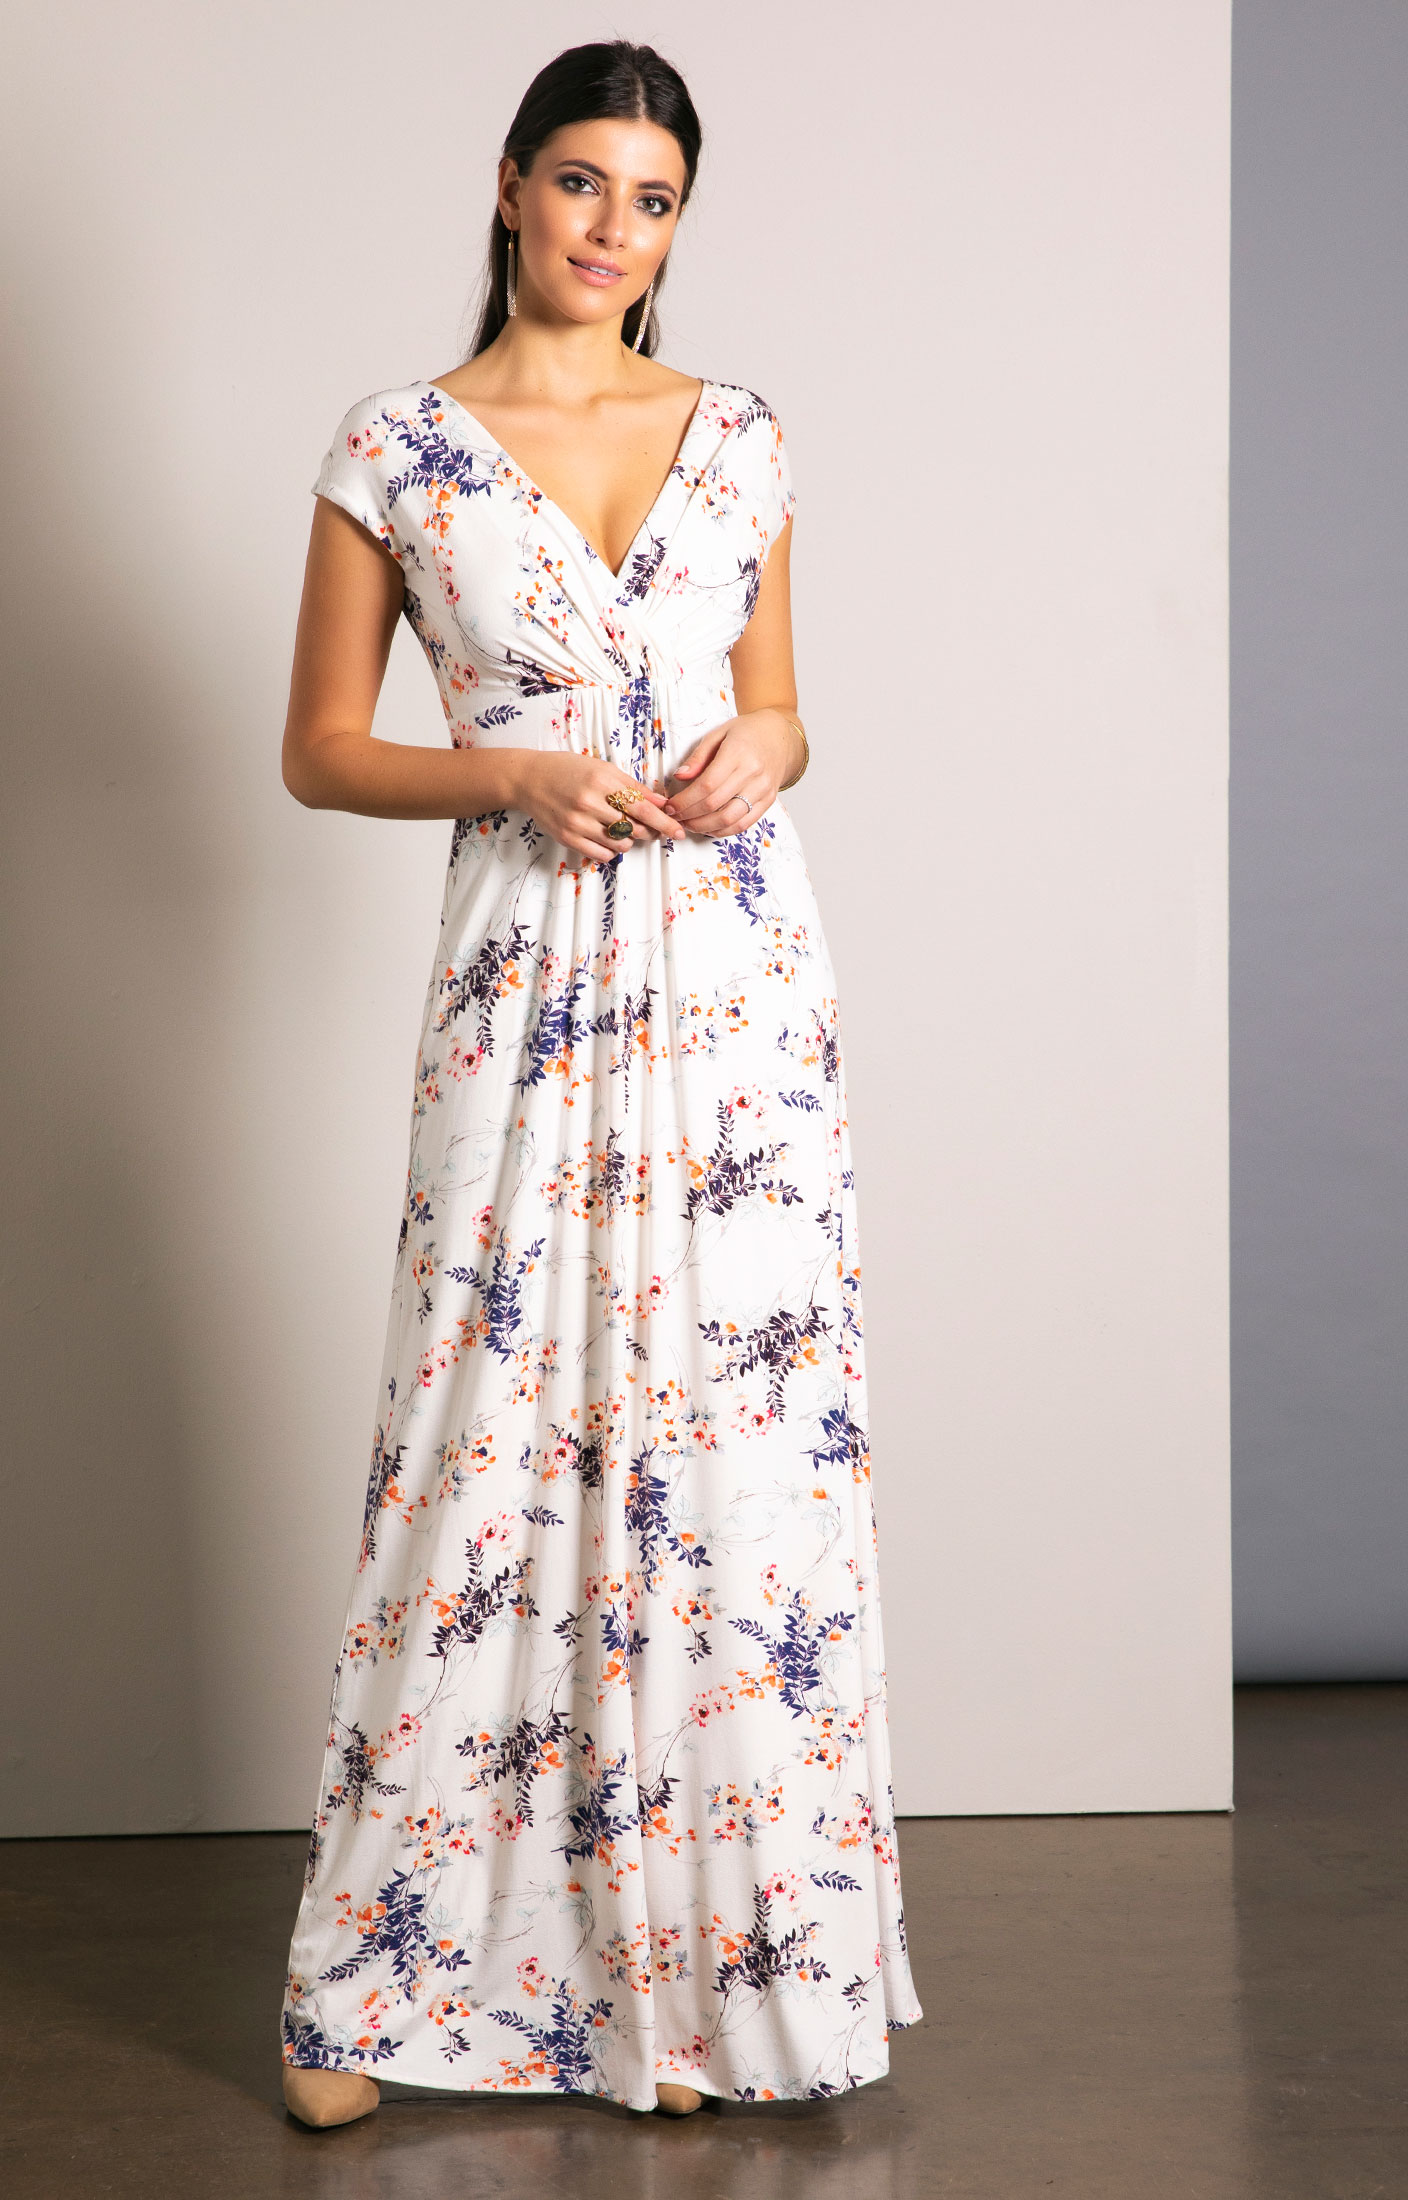 Sophia Maxi Dress (Japanese Alie Wear - Dresses, Party Wedding Evening Garden) and by Clothes